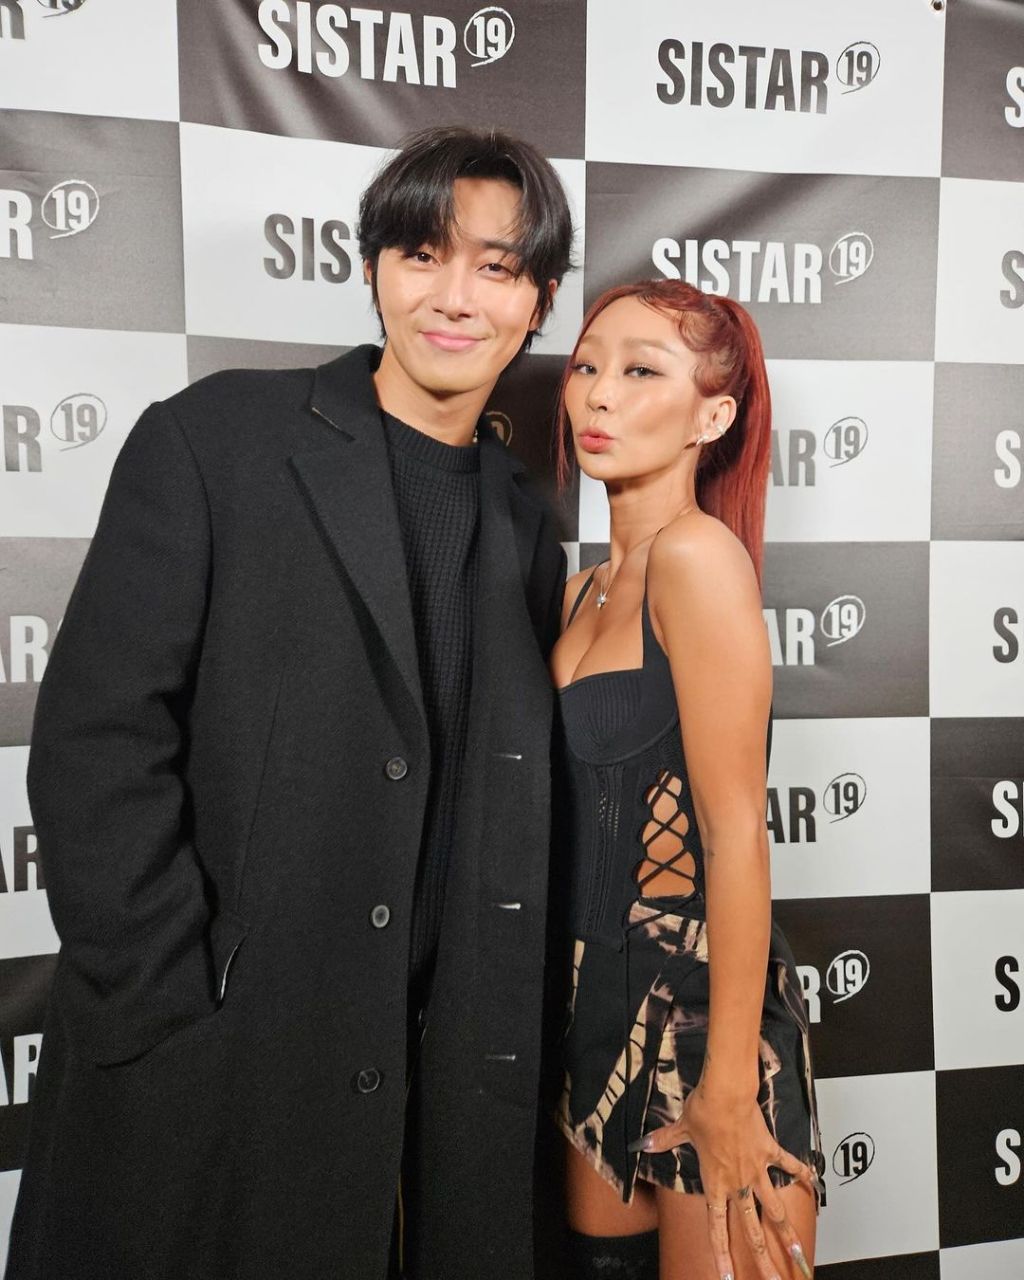 I took a picture with Park Seojoon. SISTAR19 Hyorin